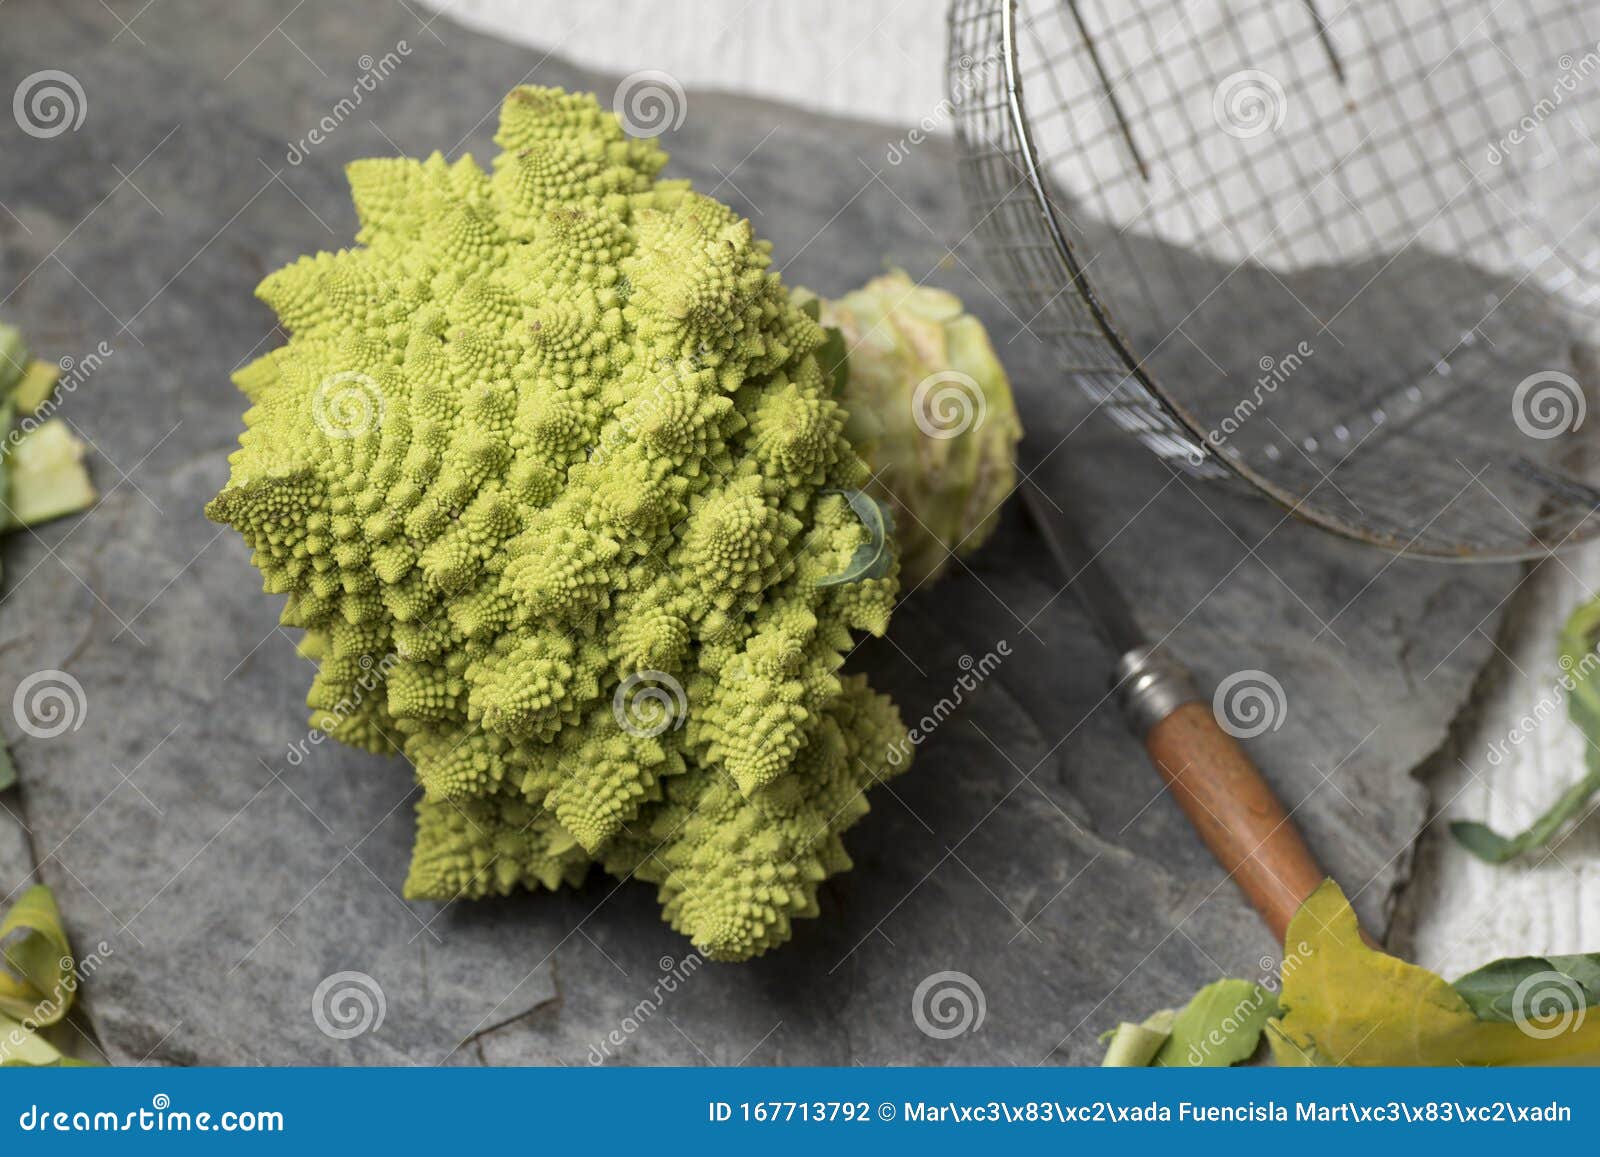 romanesco brecol in preparation to be cooked